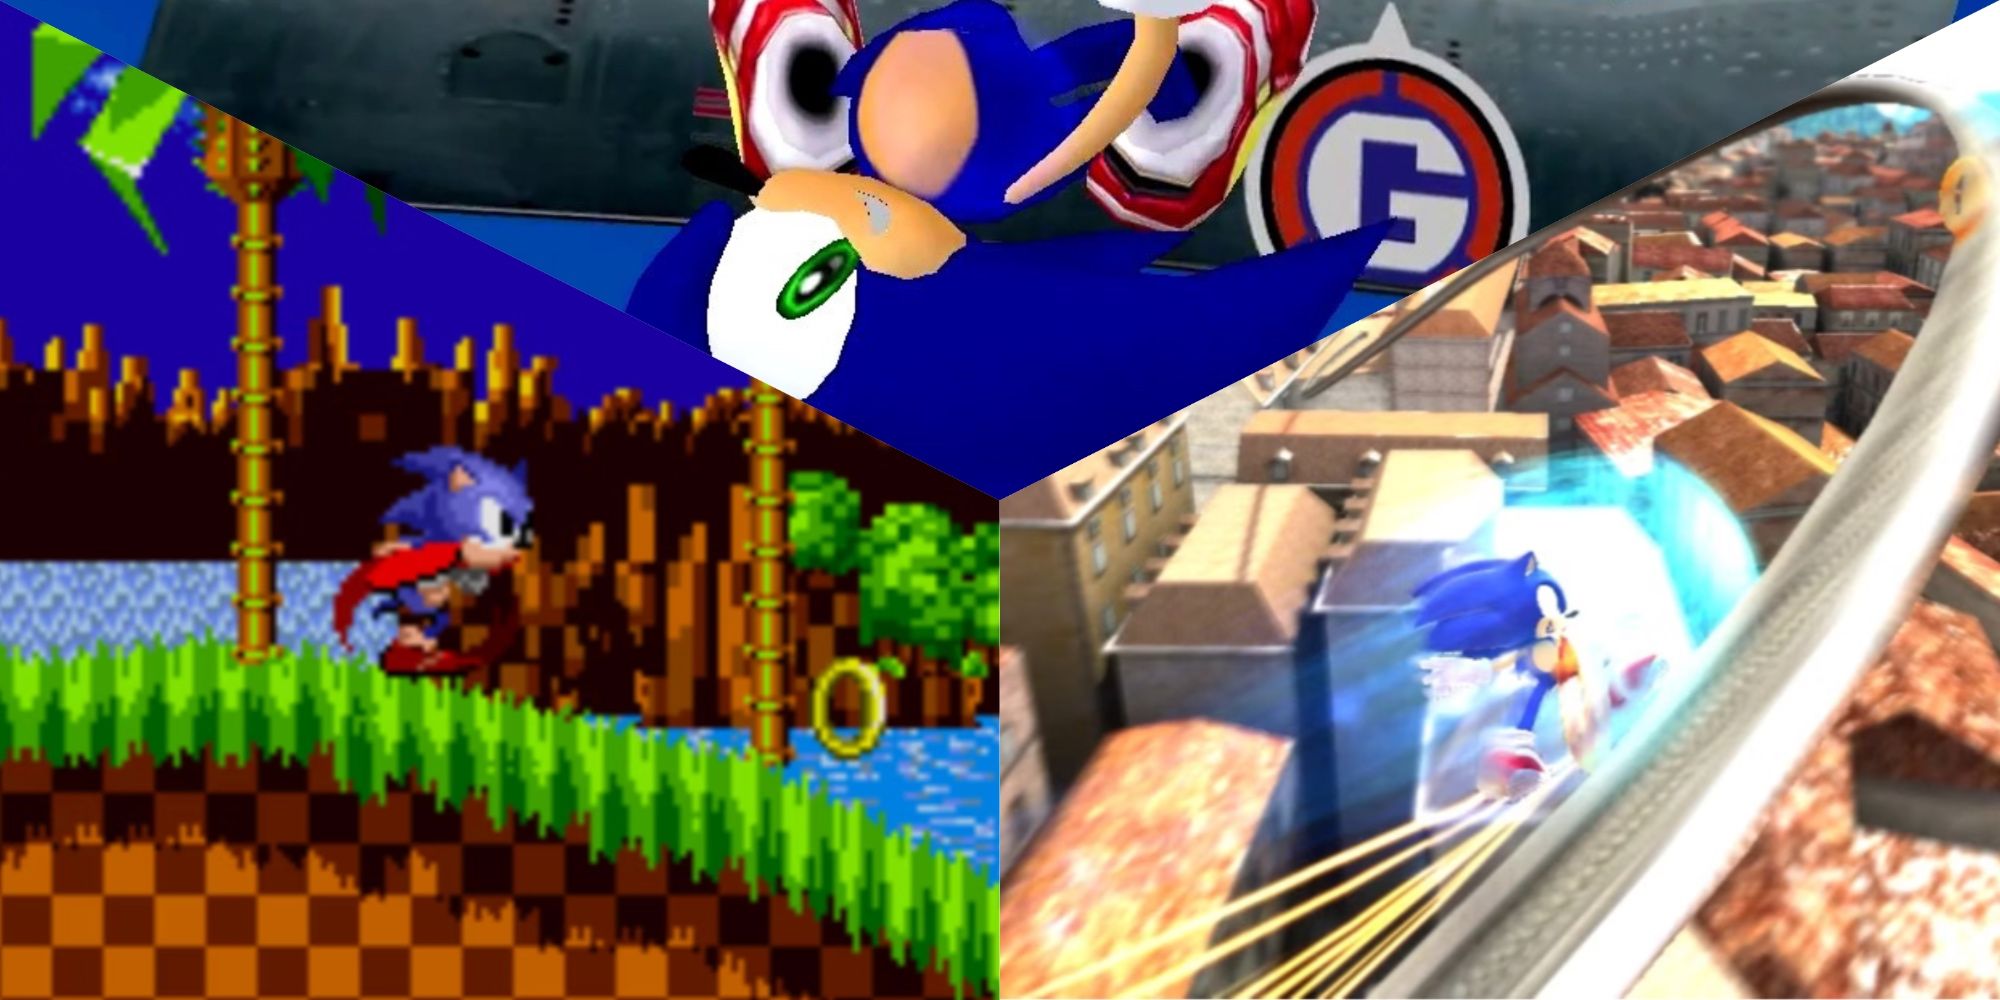 Screenshots of: 1. Sonic running through green Hill zone 2. on a grind rail through a town, 3. upside-down on a 'snowboard'